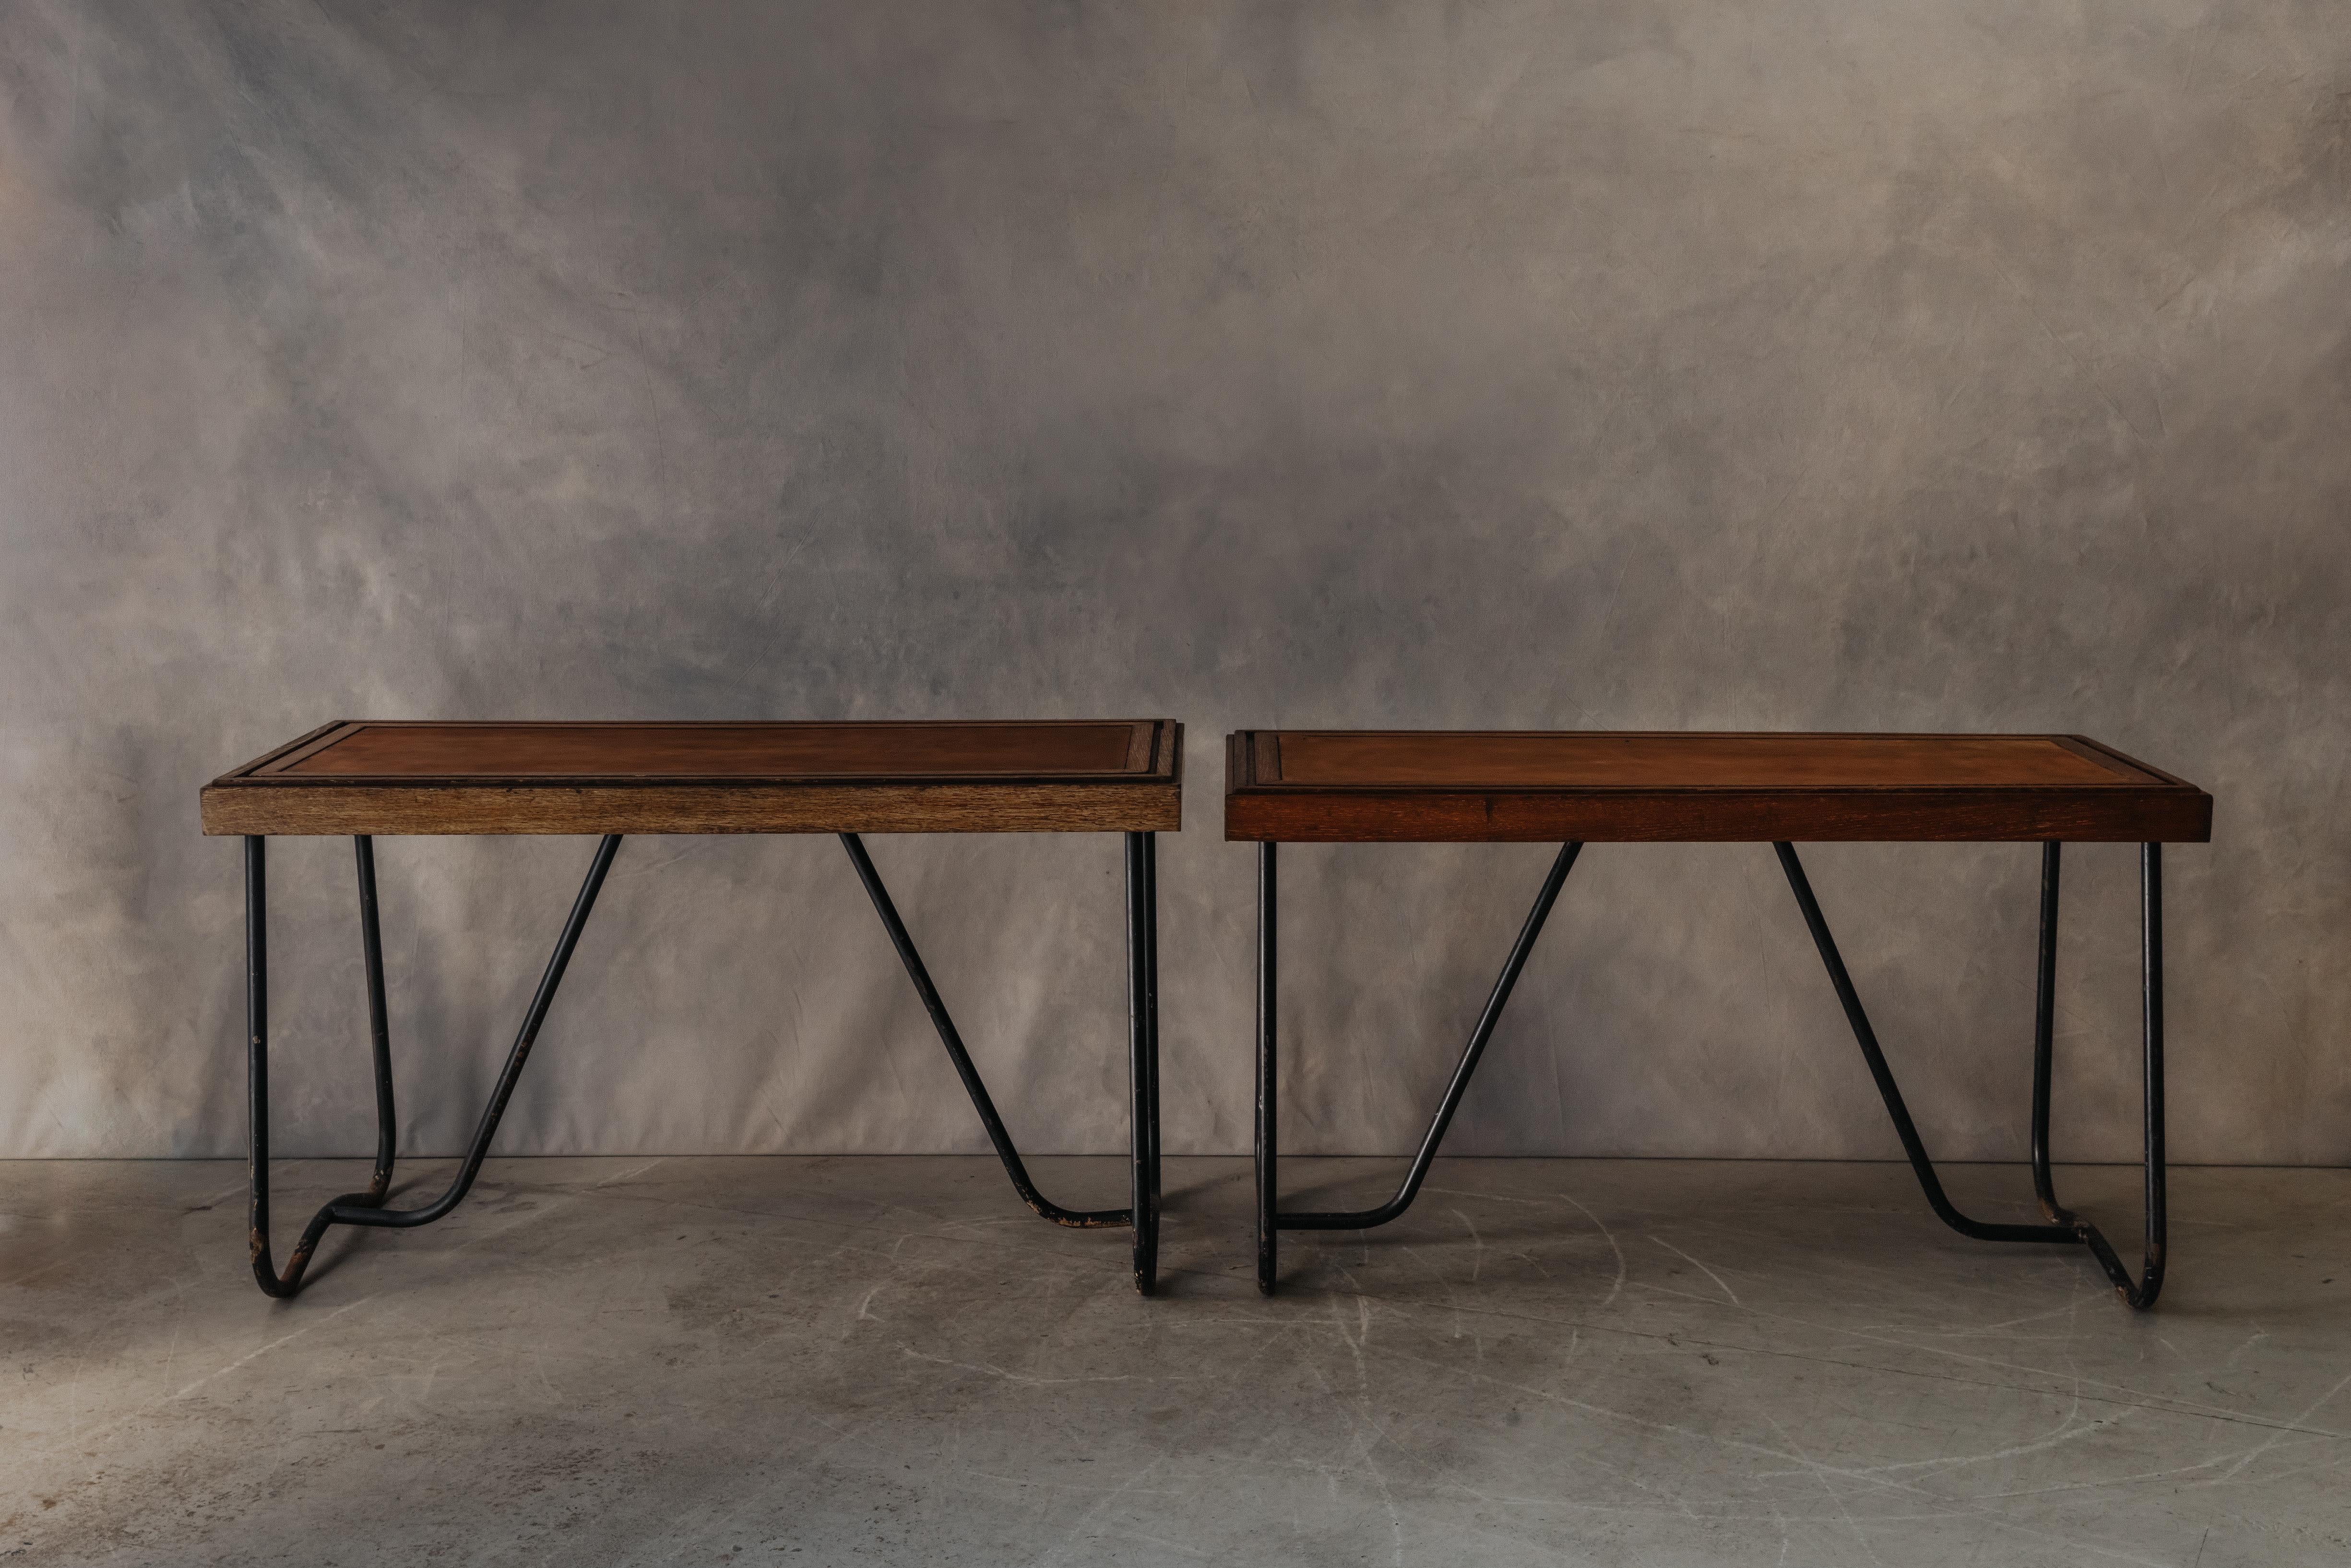 Vintage Pair Of Oak And Steel Console Tables From France, Circa 1960.  Oak surface and base with great patina and use.  Great from display.  One console measures .5